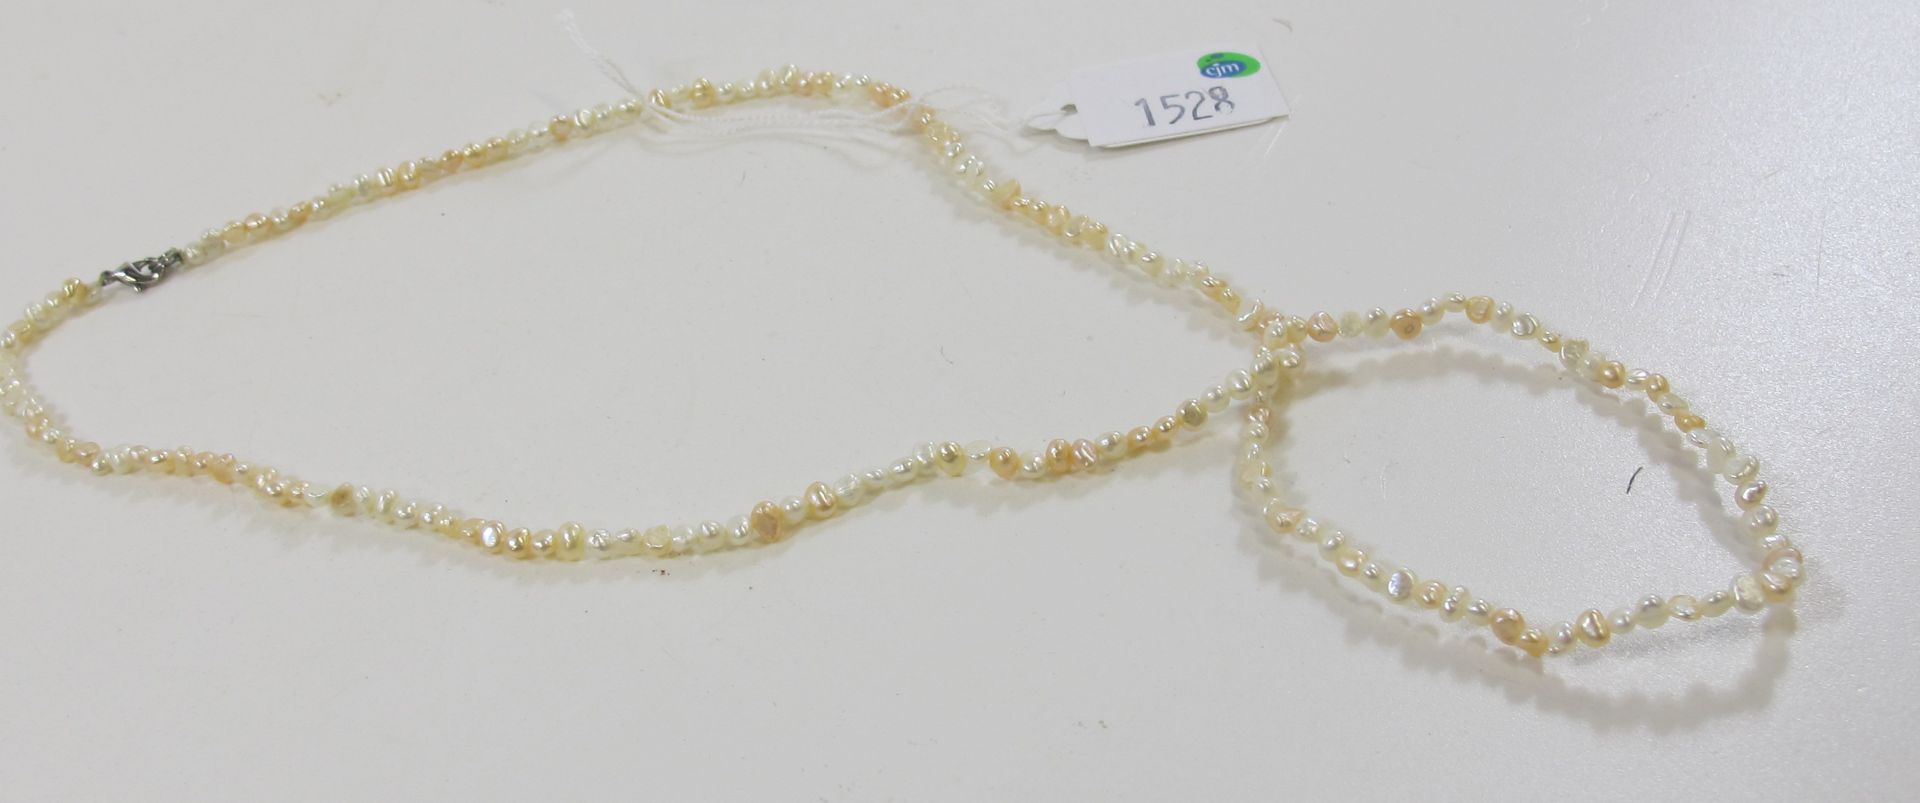 Freshwater Pearl Necklace and Bracelet (est £20-£40)